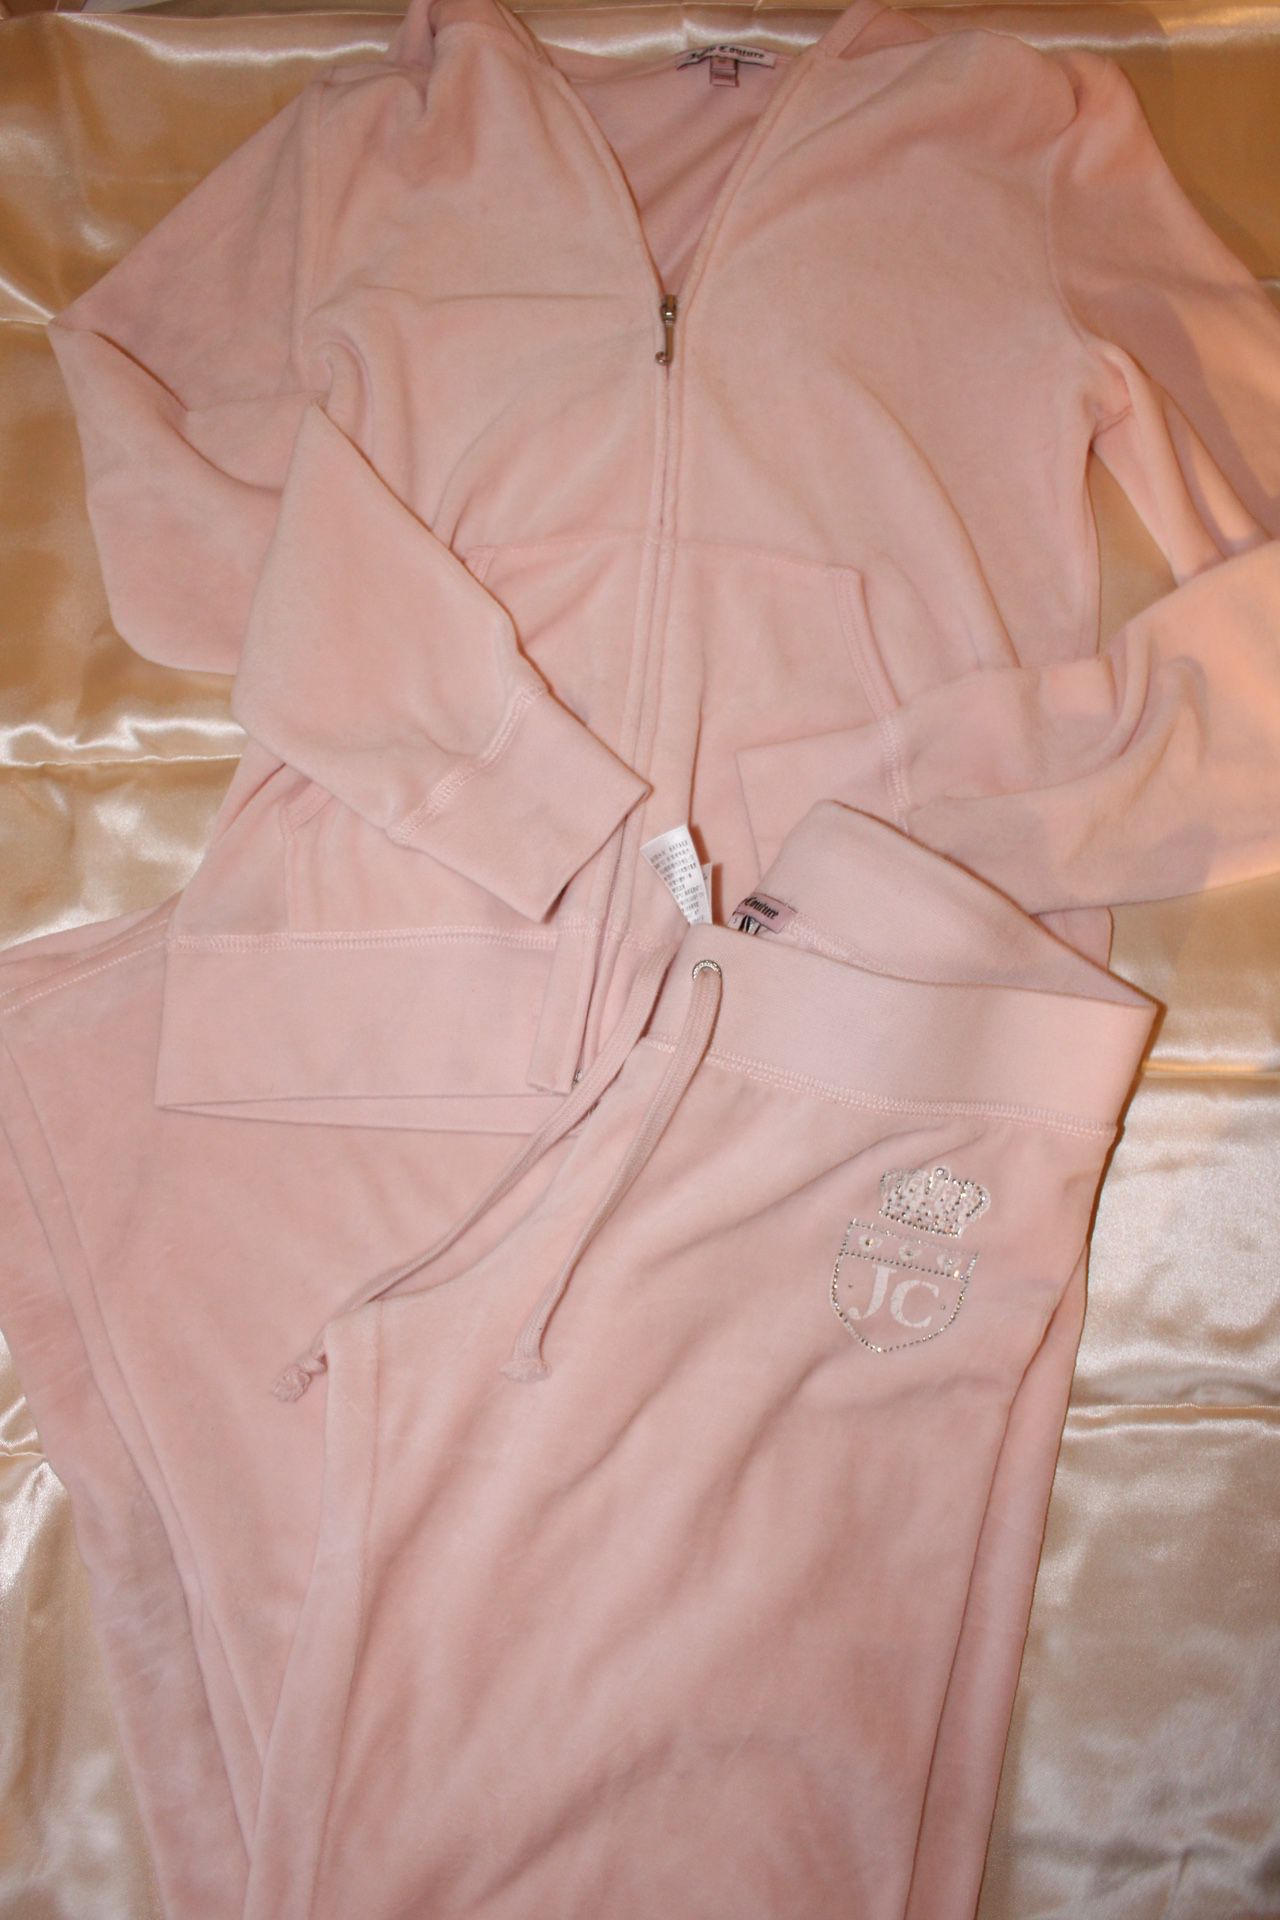 Juicy couture tracksuit